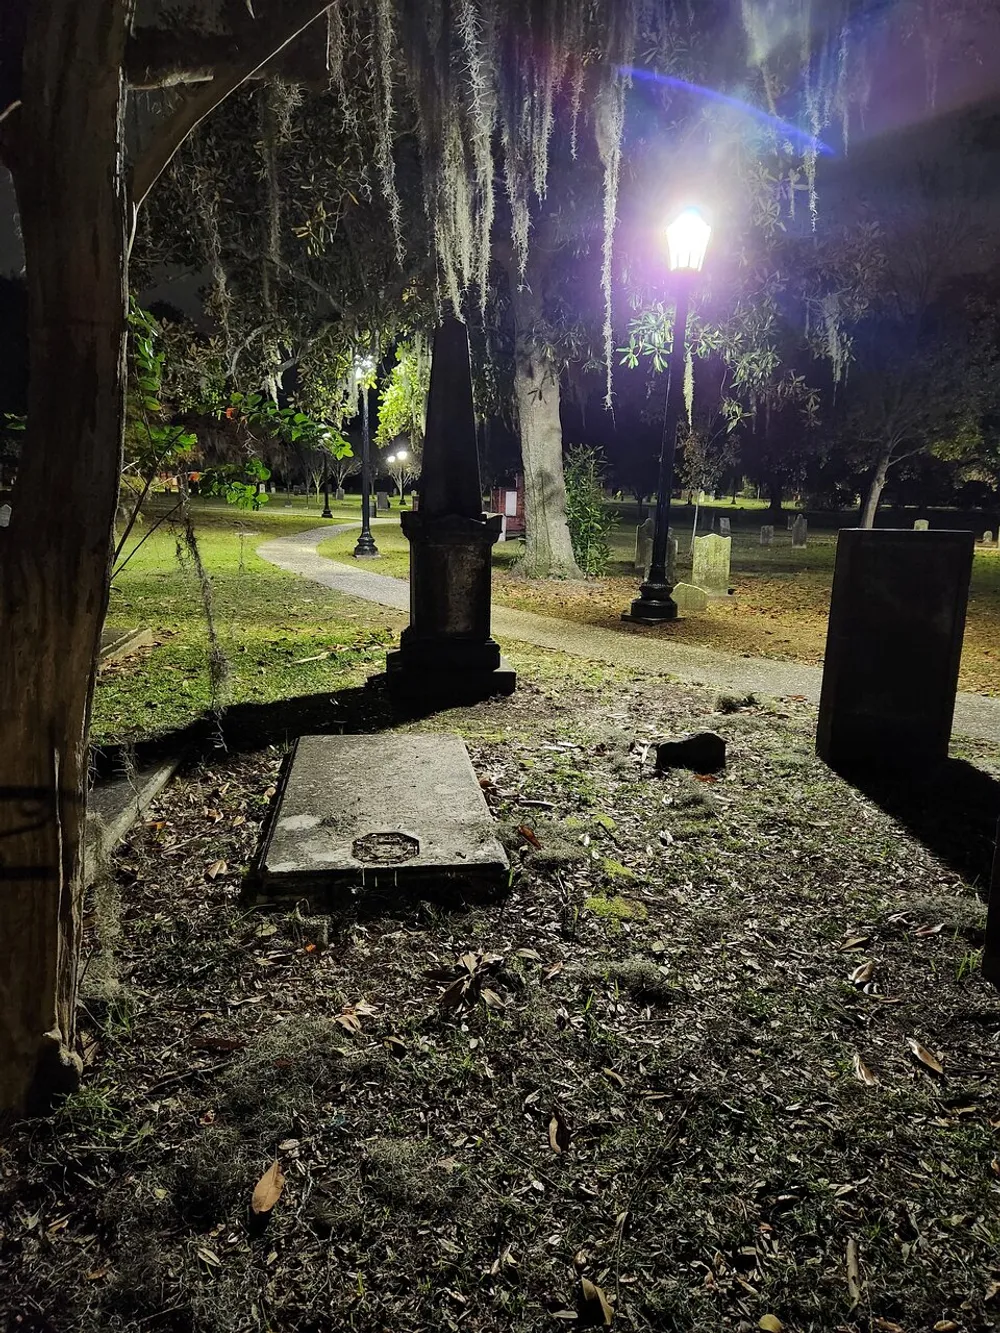 The image shows a serene nocturnal scene of a cemetery with a lit lamp post moss-laden trees and tombstones creating a somber and tranquil atmosphere